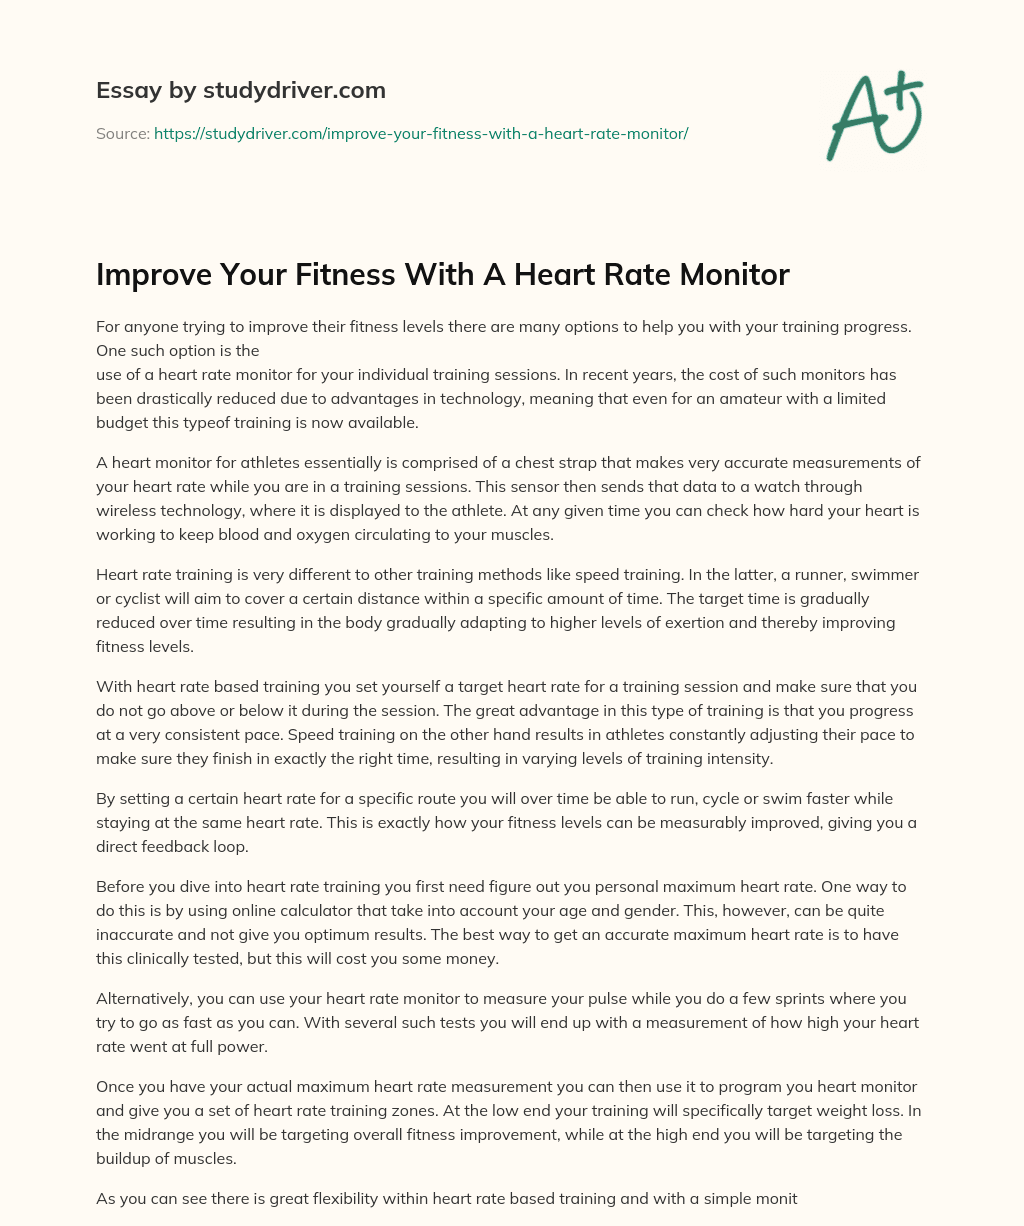 Improve your Fitness with a Heart Rate Monitor essay